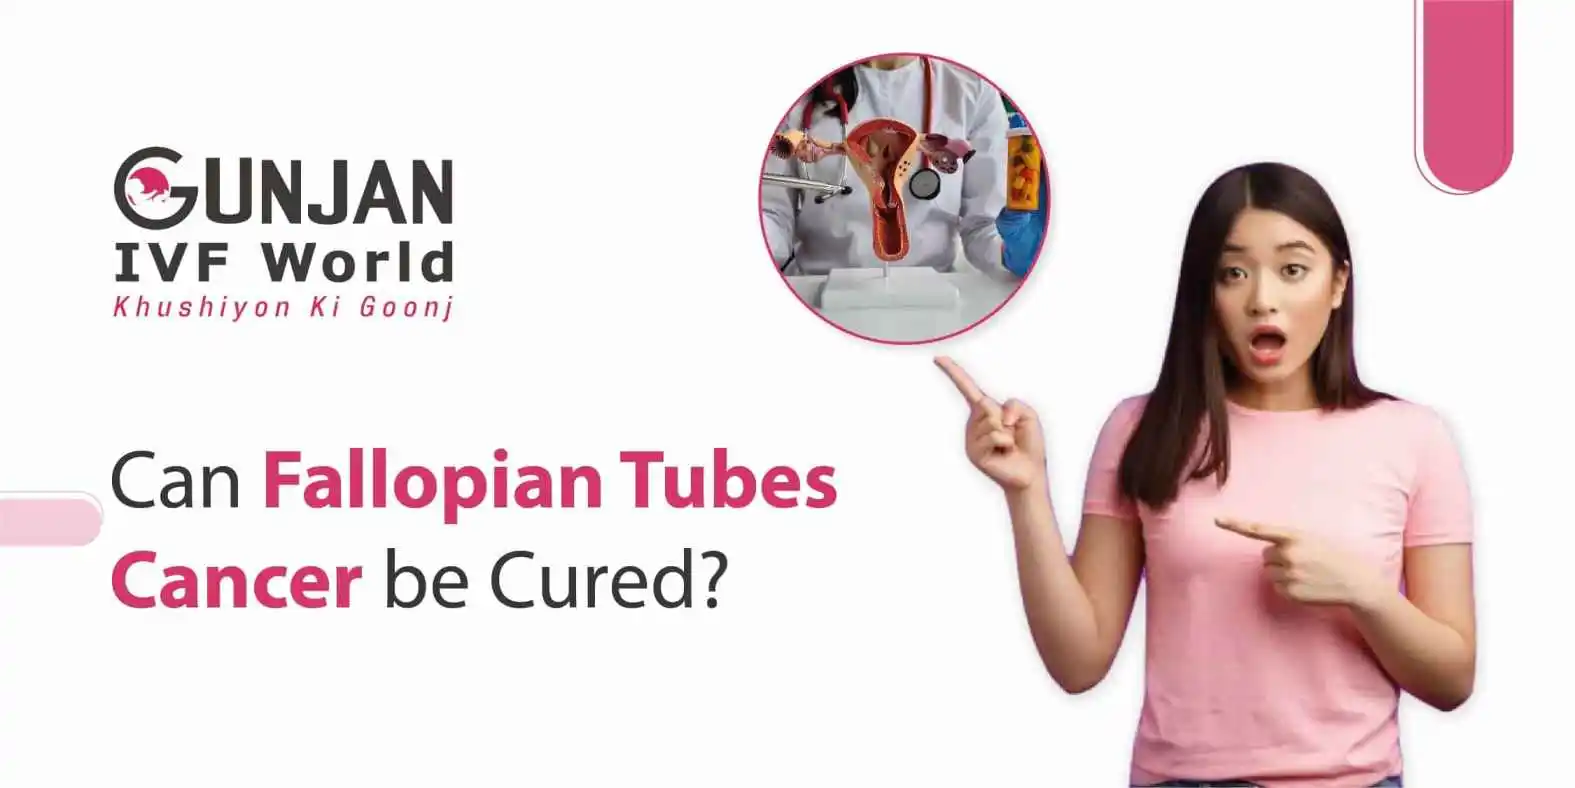 Can fallopian tube cancer be cured